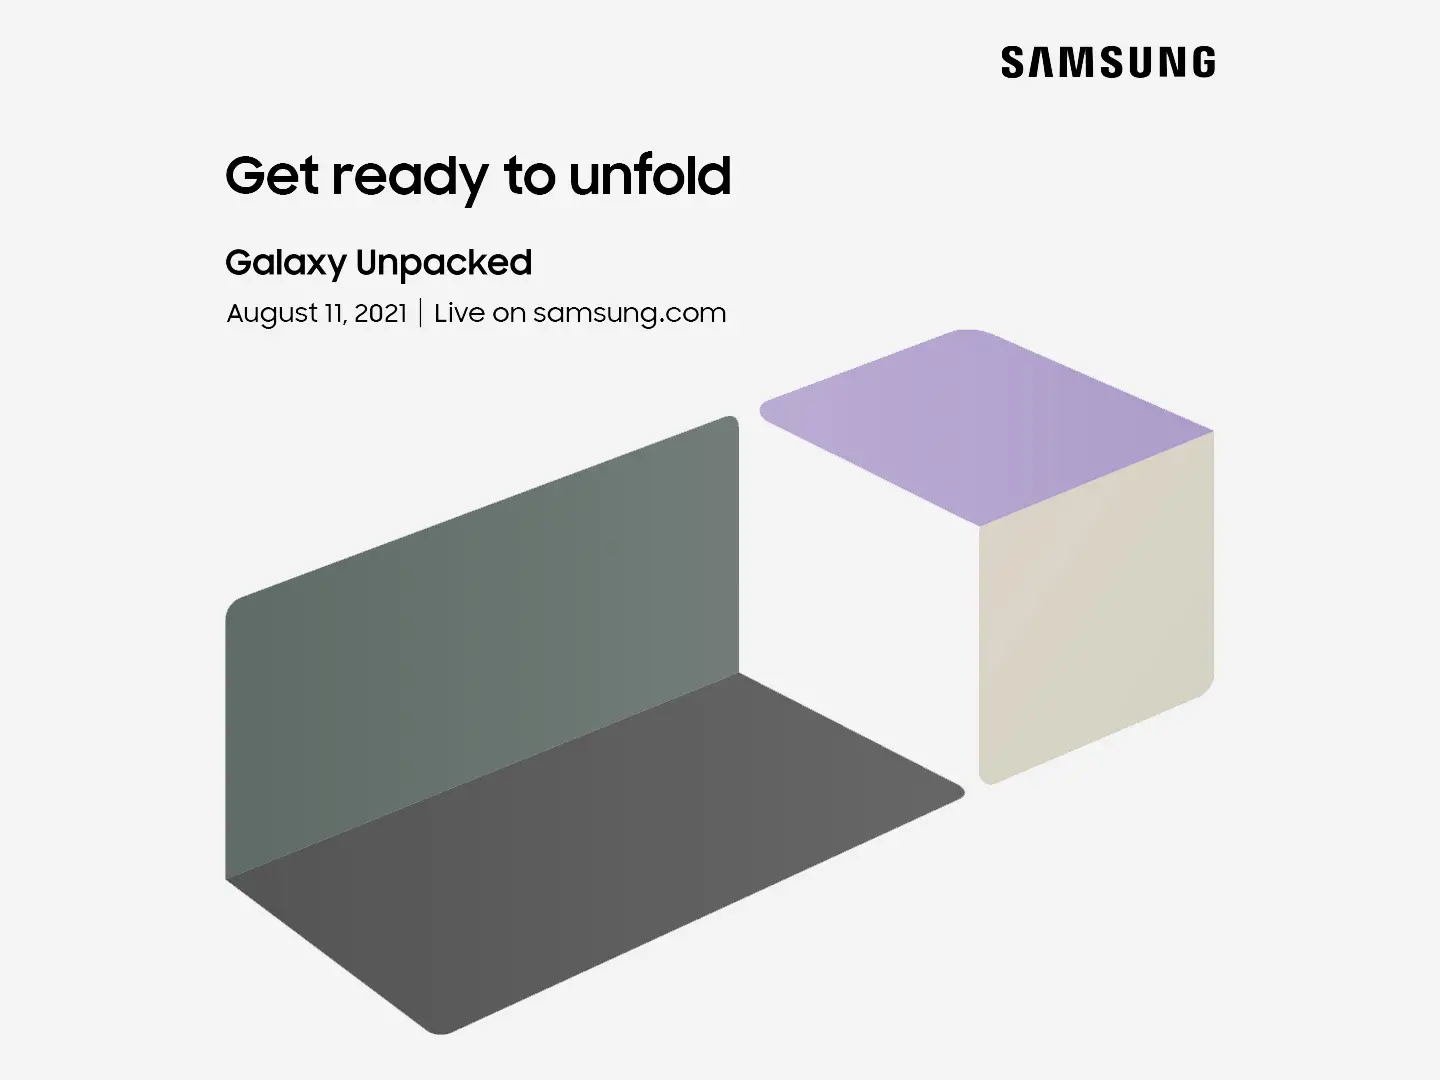 Samsung needs you to "prepare to unfurl" at Unpacked on August eleventh